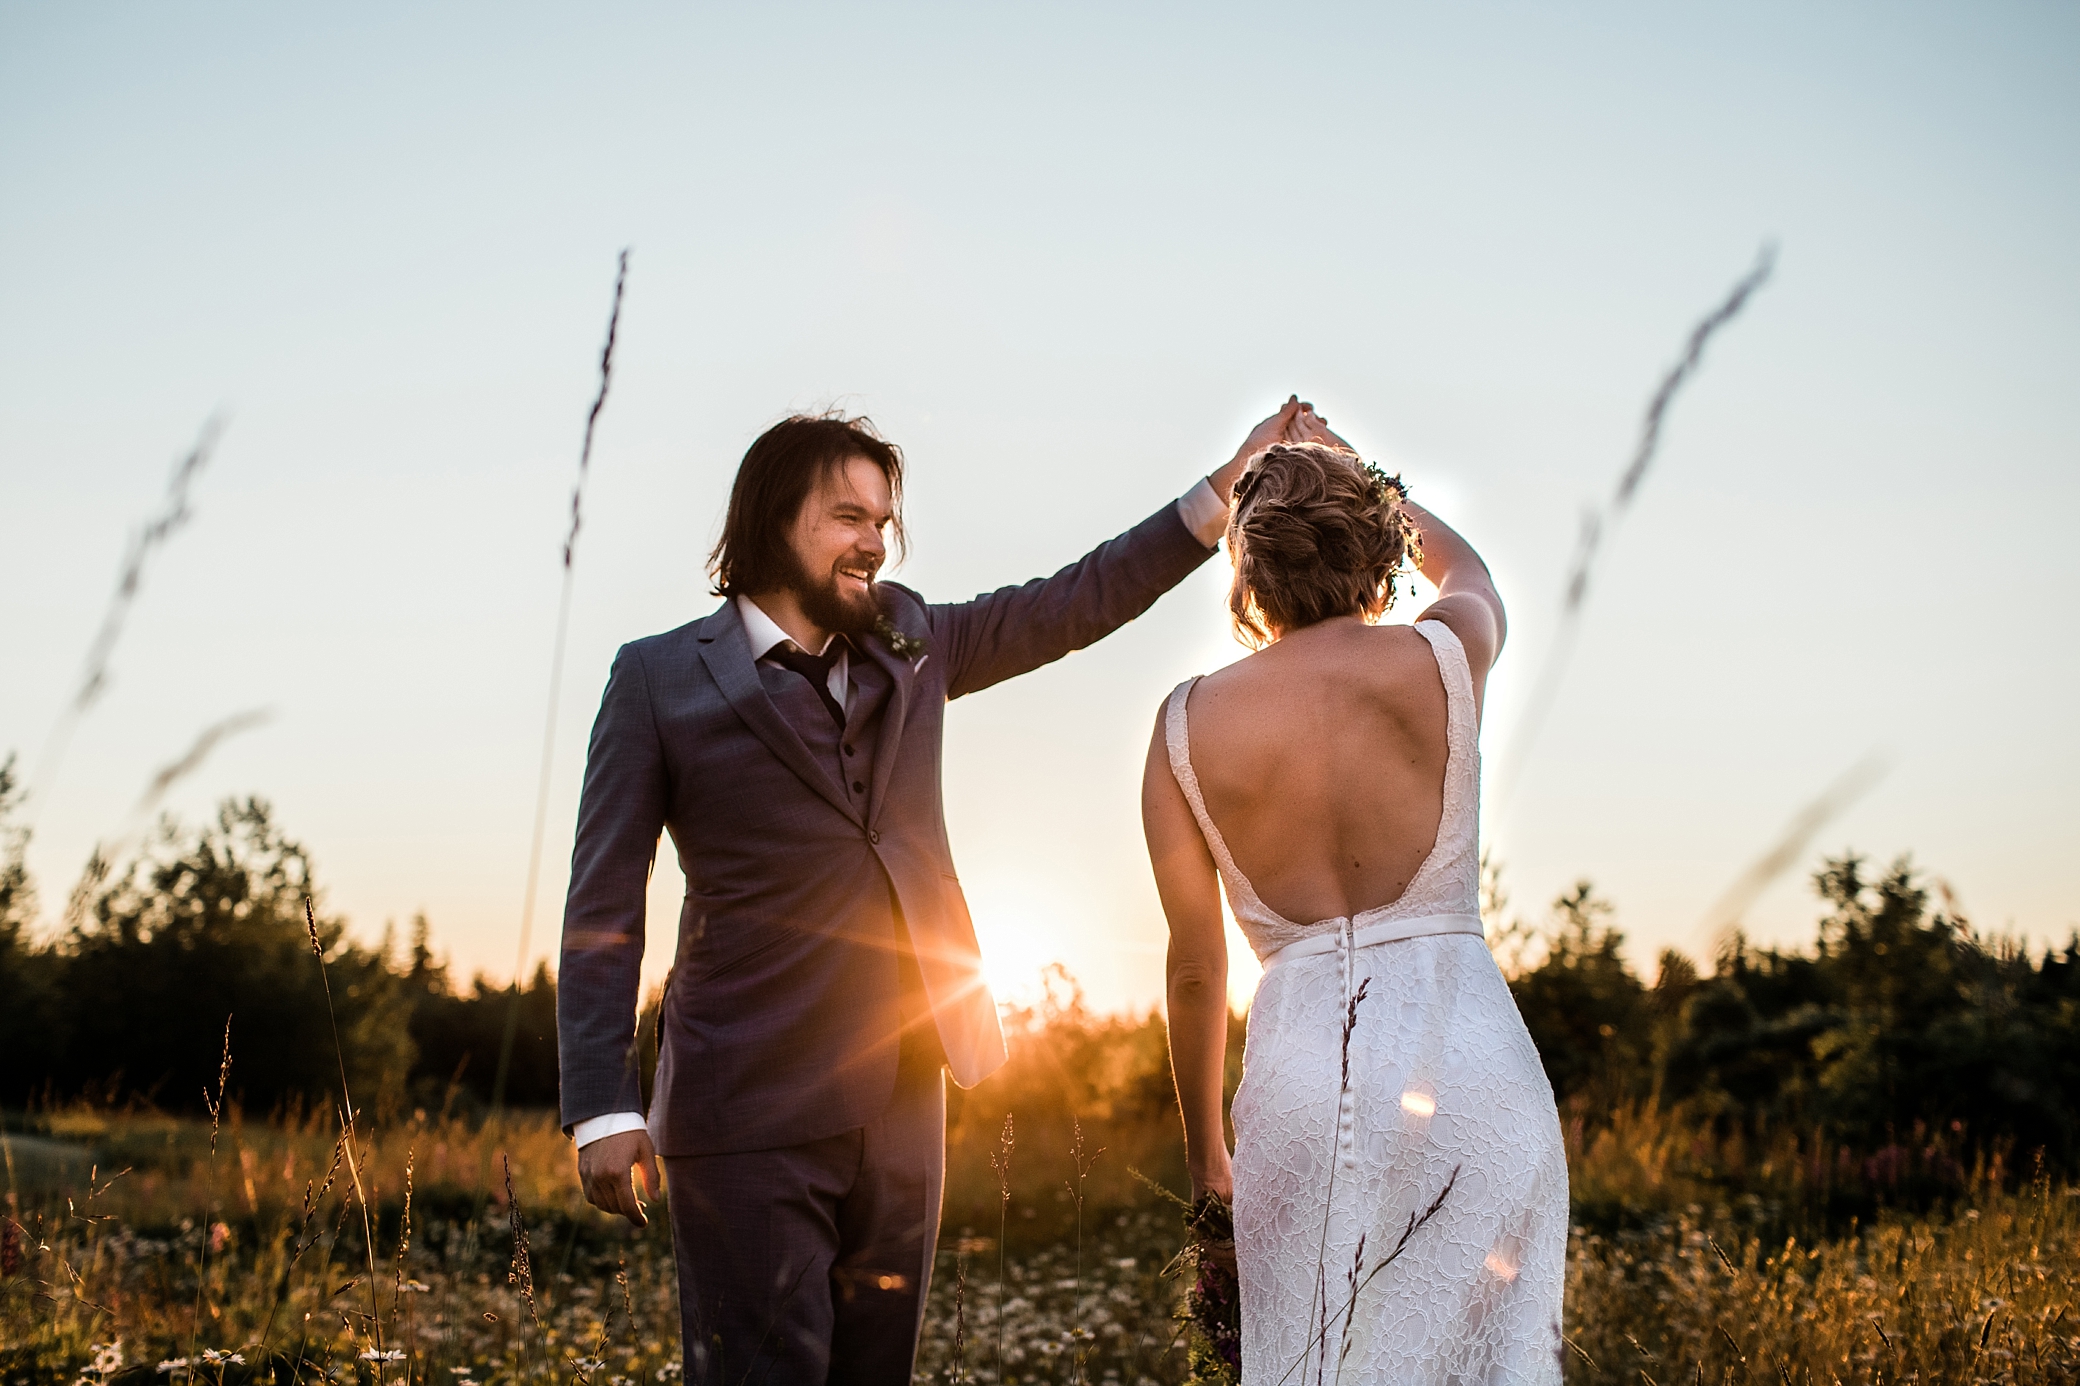 Bride and groom dancing at sunset | Megan Montalvo Photography 